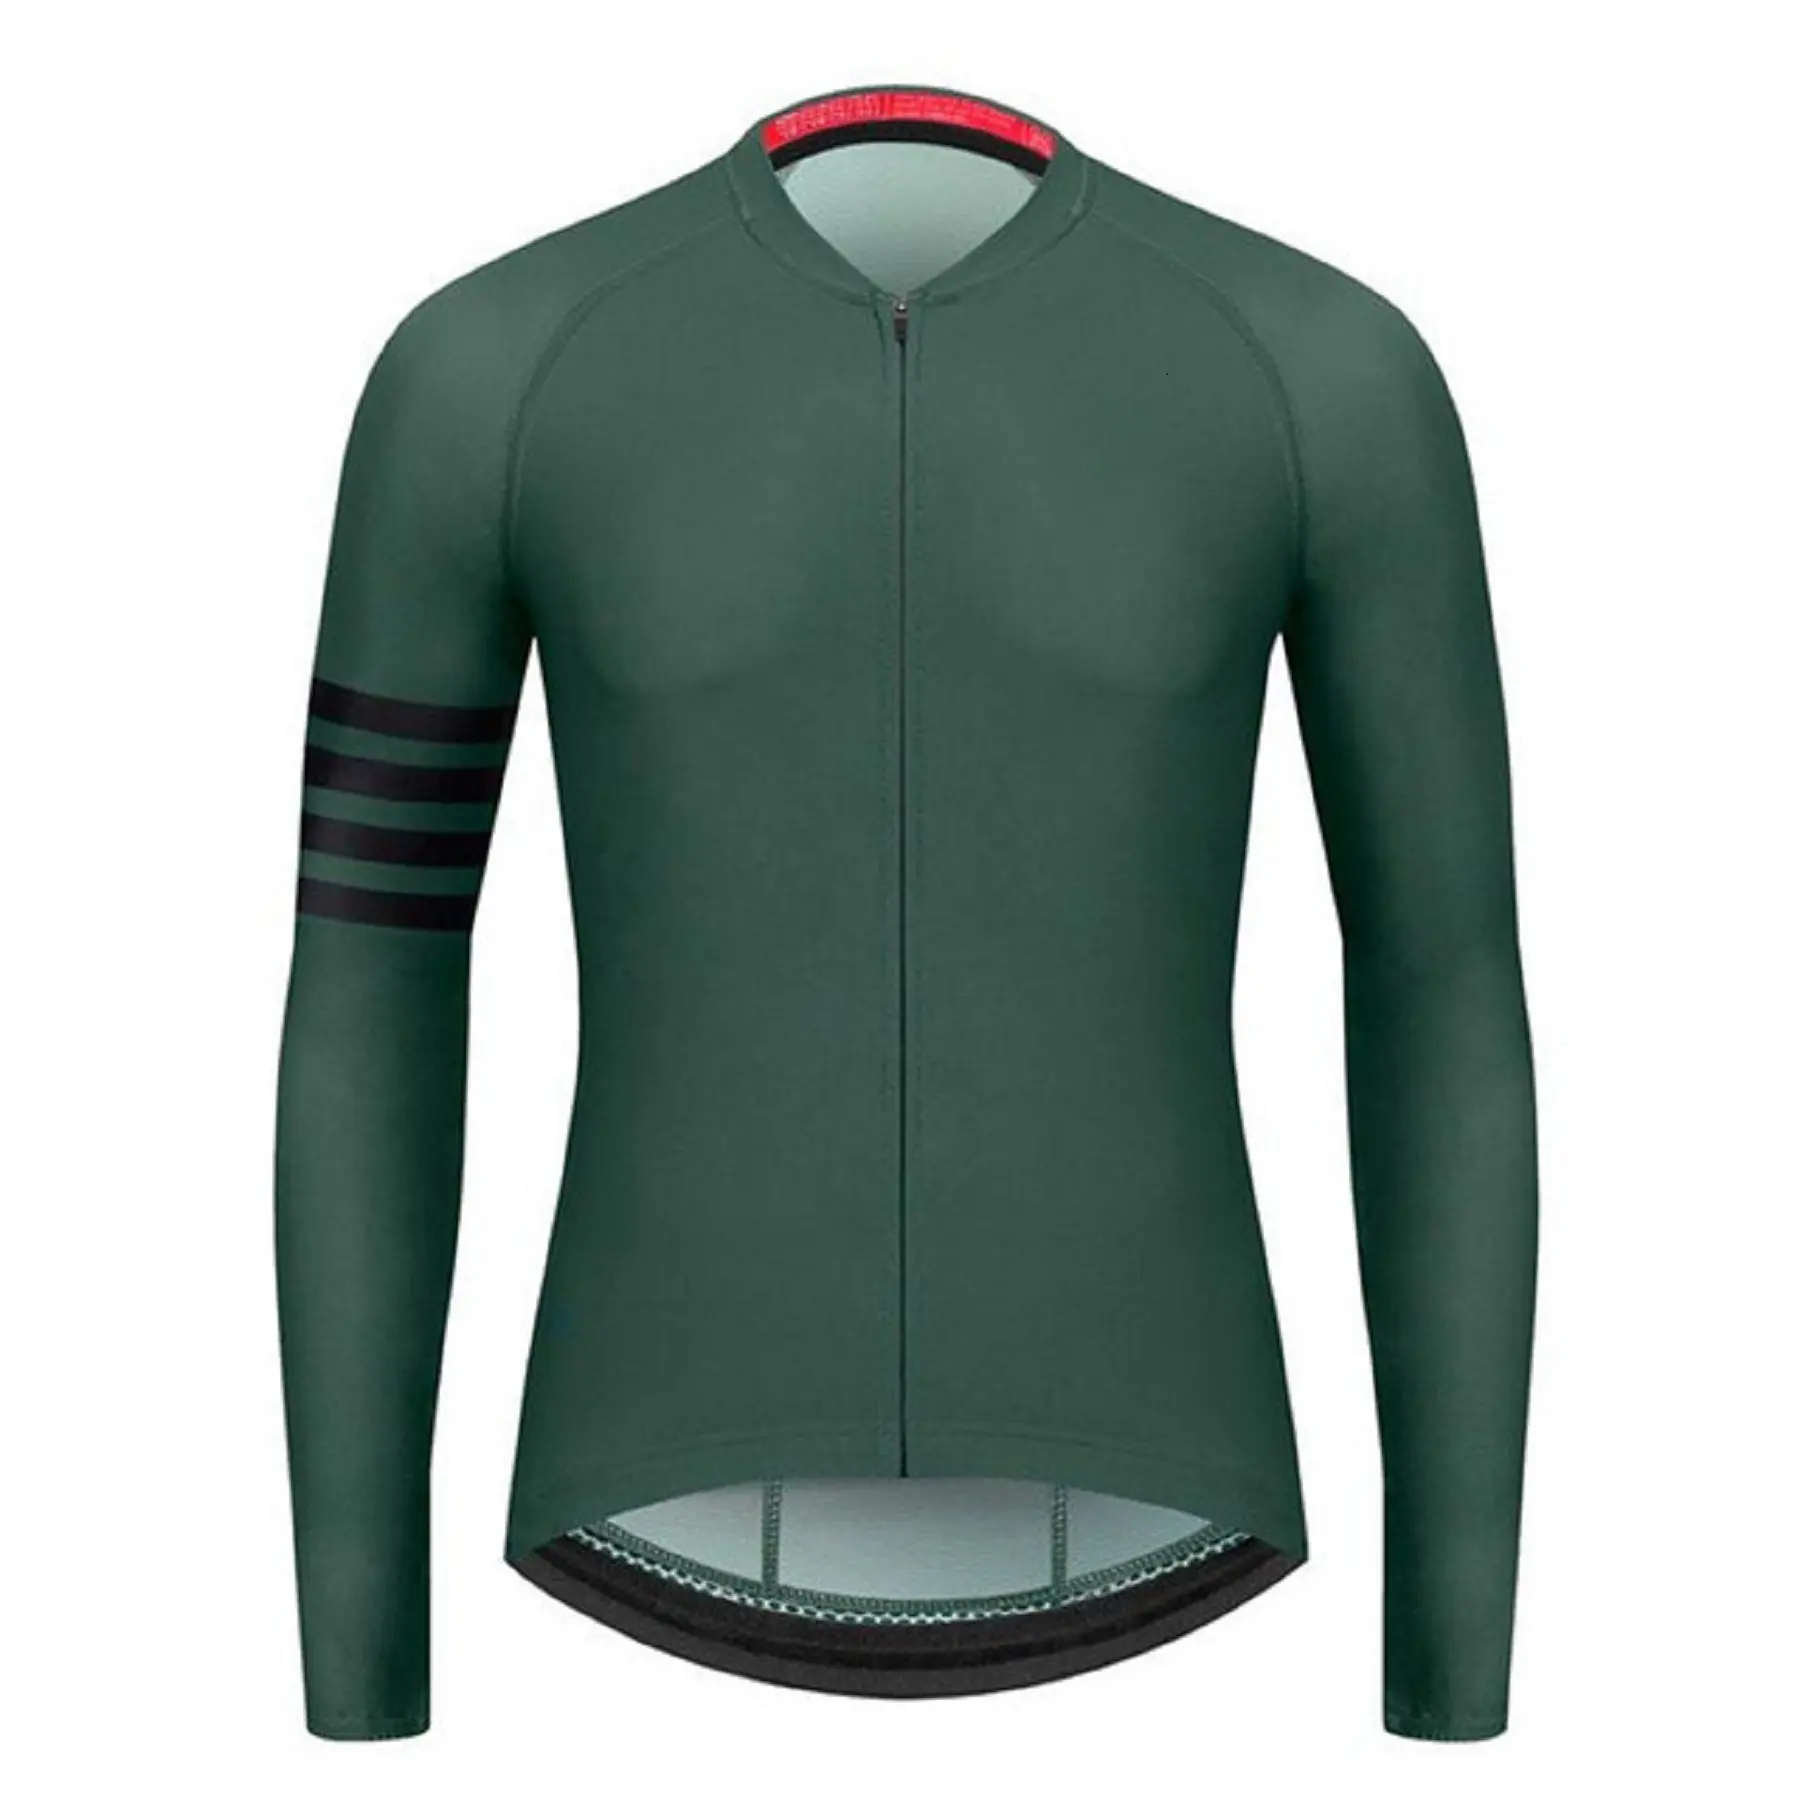 OEM ROPA DE CICLISMO Cycling Clothing maillot Men Woman Mountain Clothes with windproof pocket